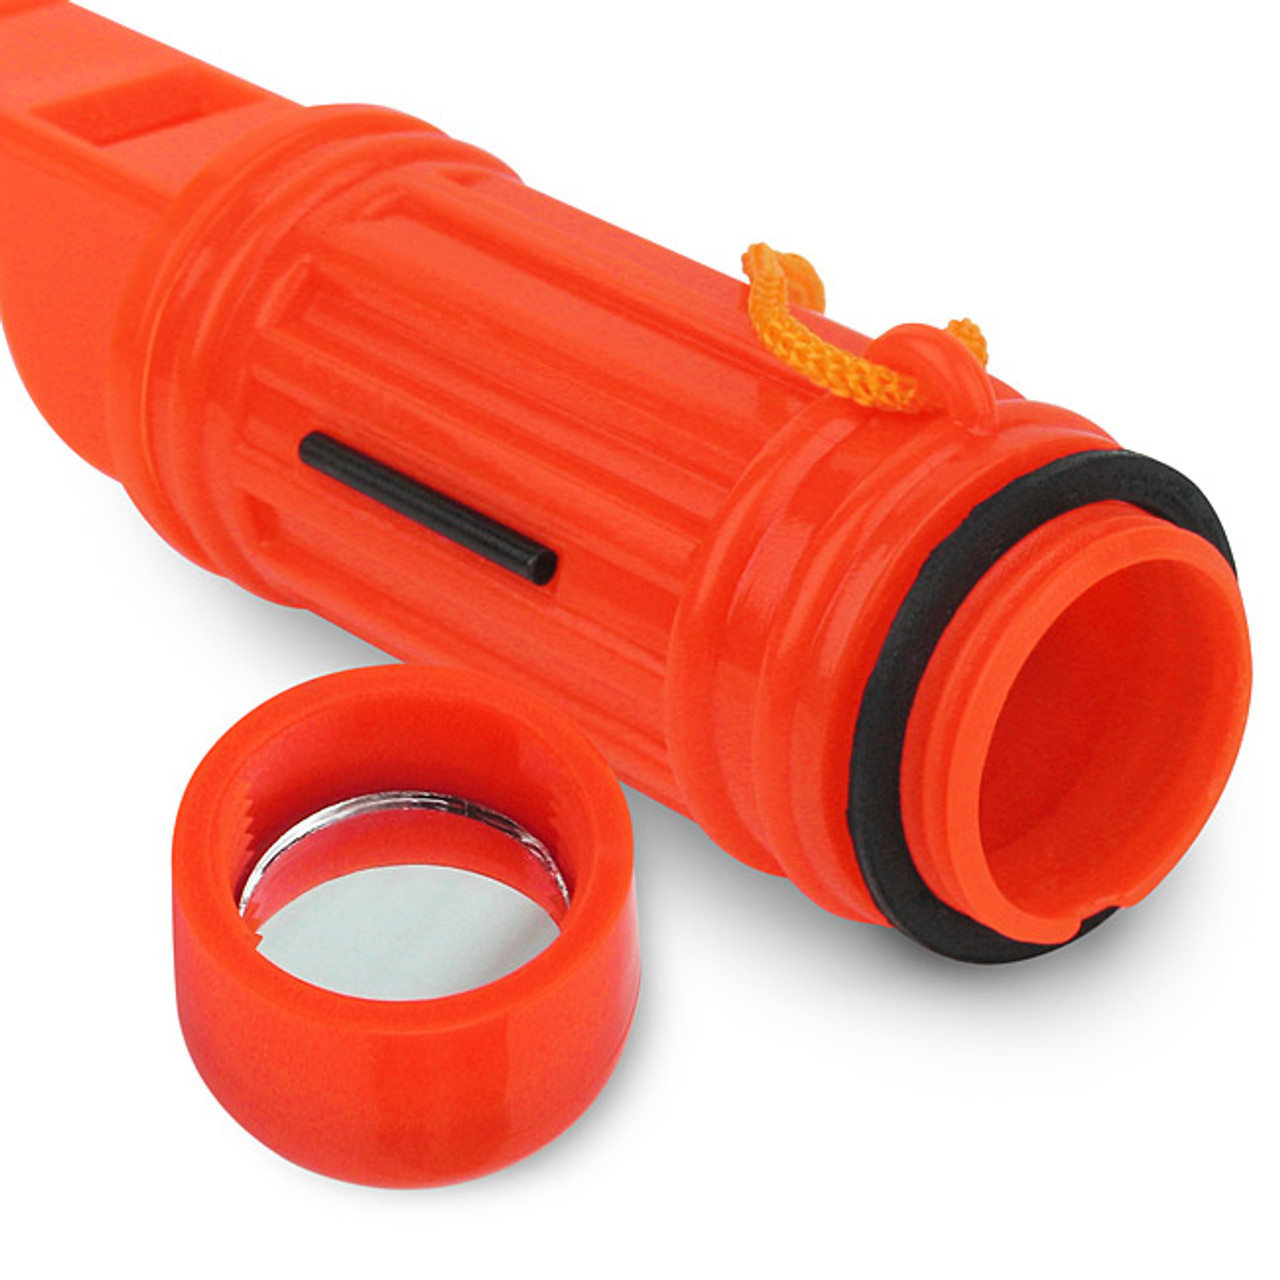 5-In-1 Survival Whistle with Compass and Waterproof Container